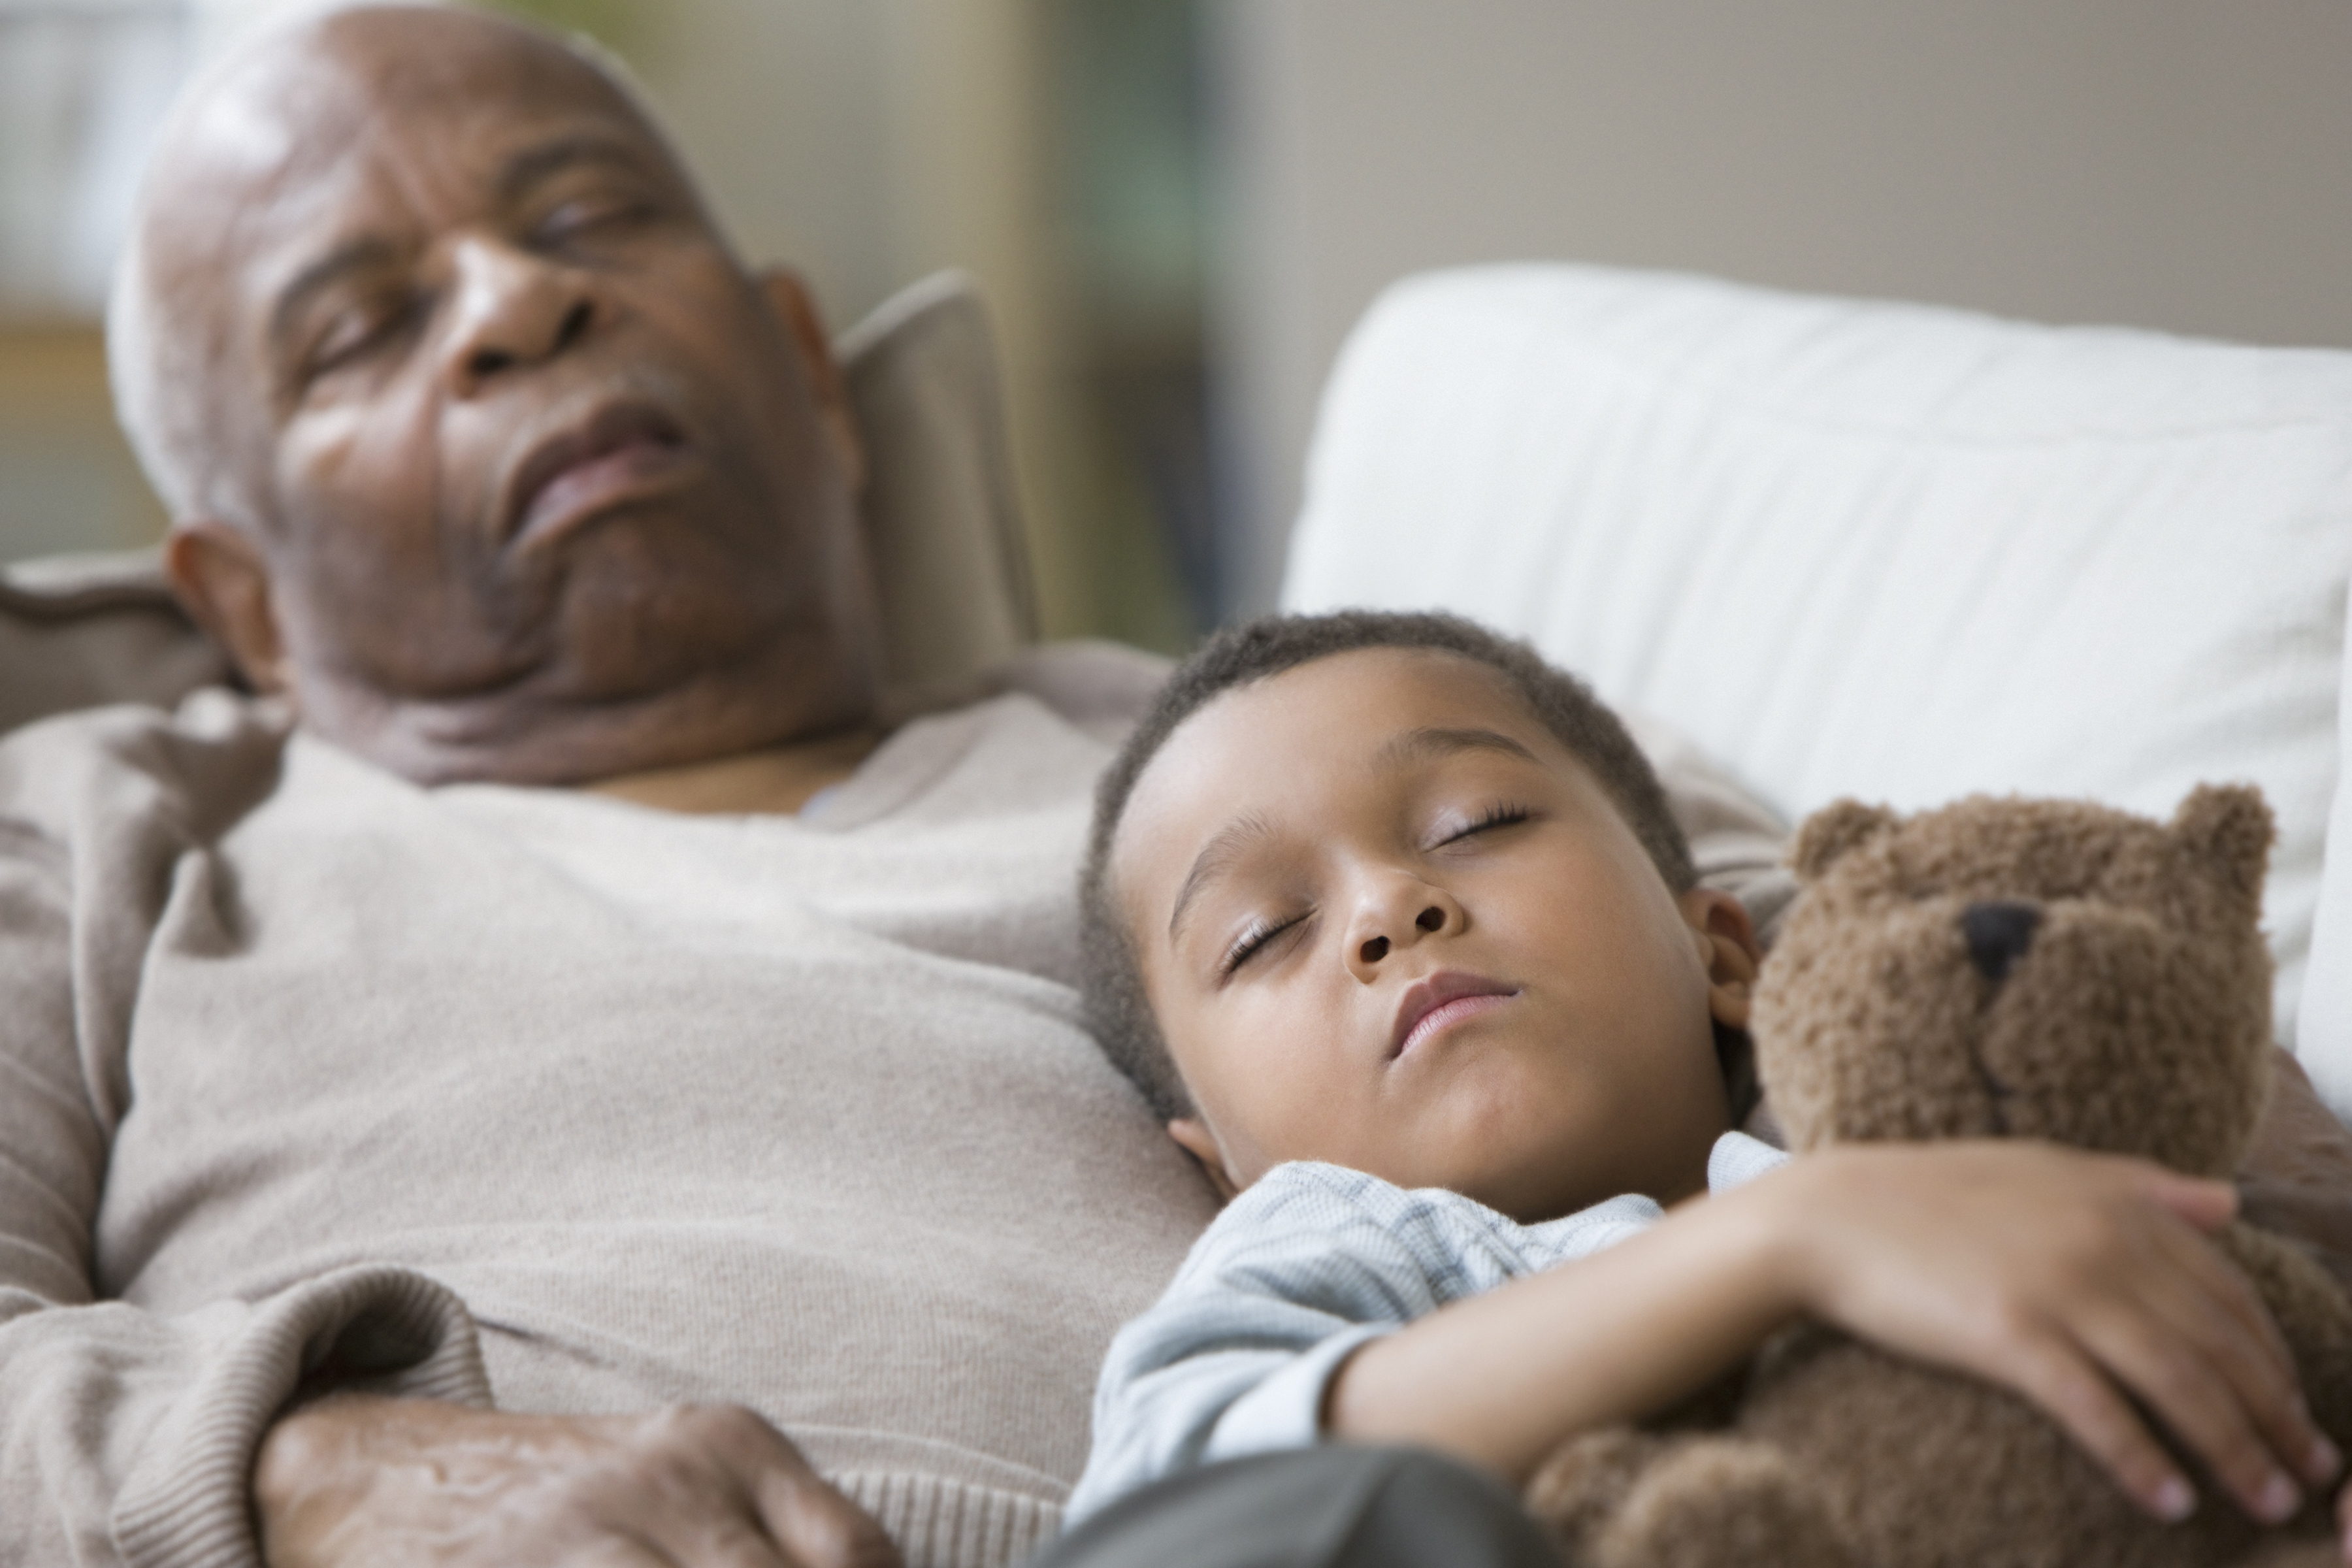 Grandfather and grandson taking a nap together on the couch. (Getty Images)